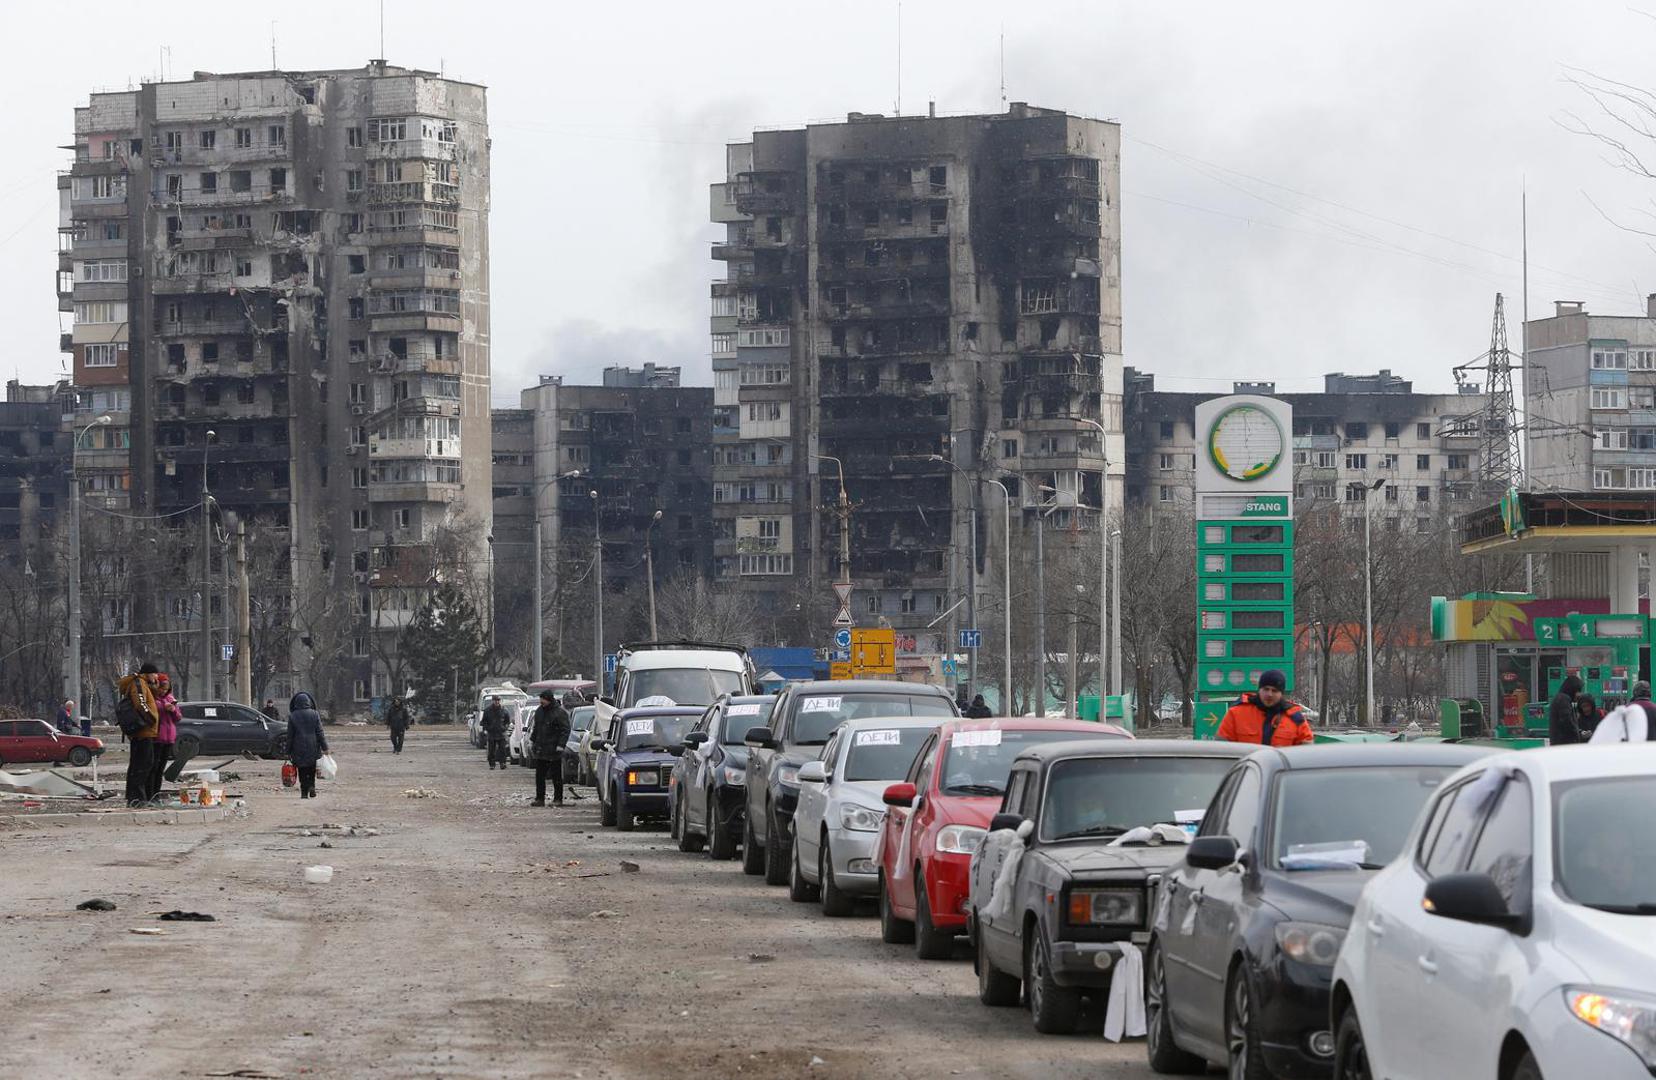 A view shows a line of cars near blocks of flats destroyed during Ukraine-Russia conflict, as evacuees leave the besieged port city of Mariupol, Ukraine March 17, 2022. REUTERS/Alexander Ermochenko Photo: Alexander Ermochenko/REUTERS